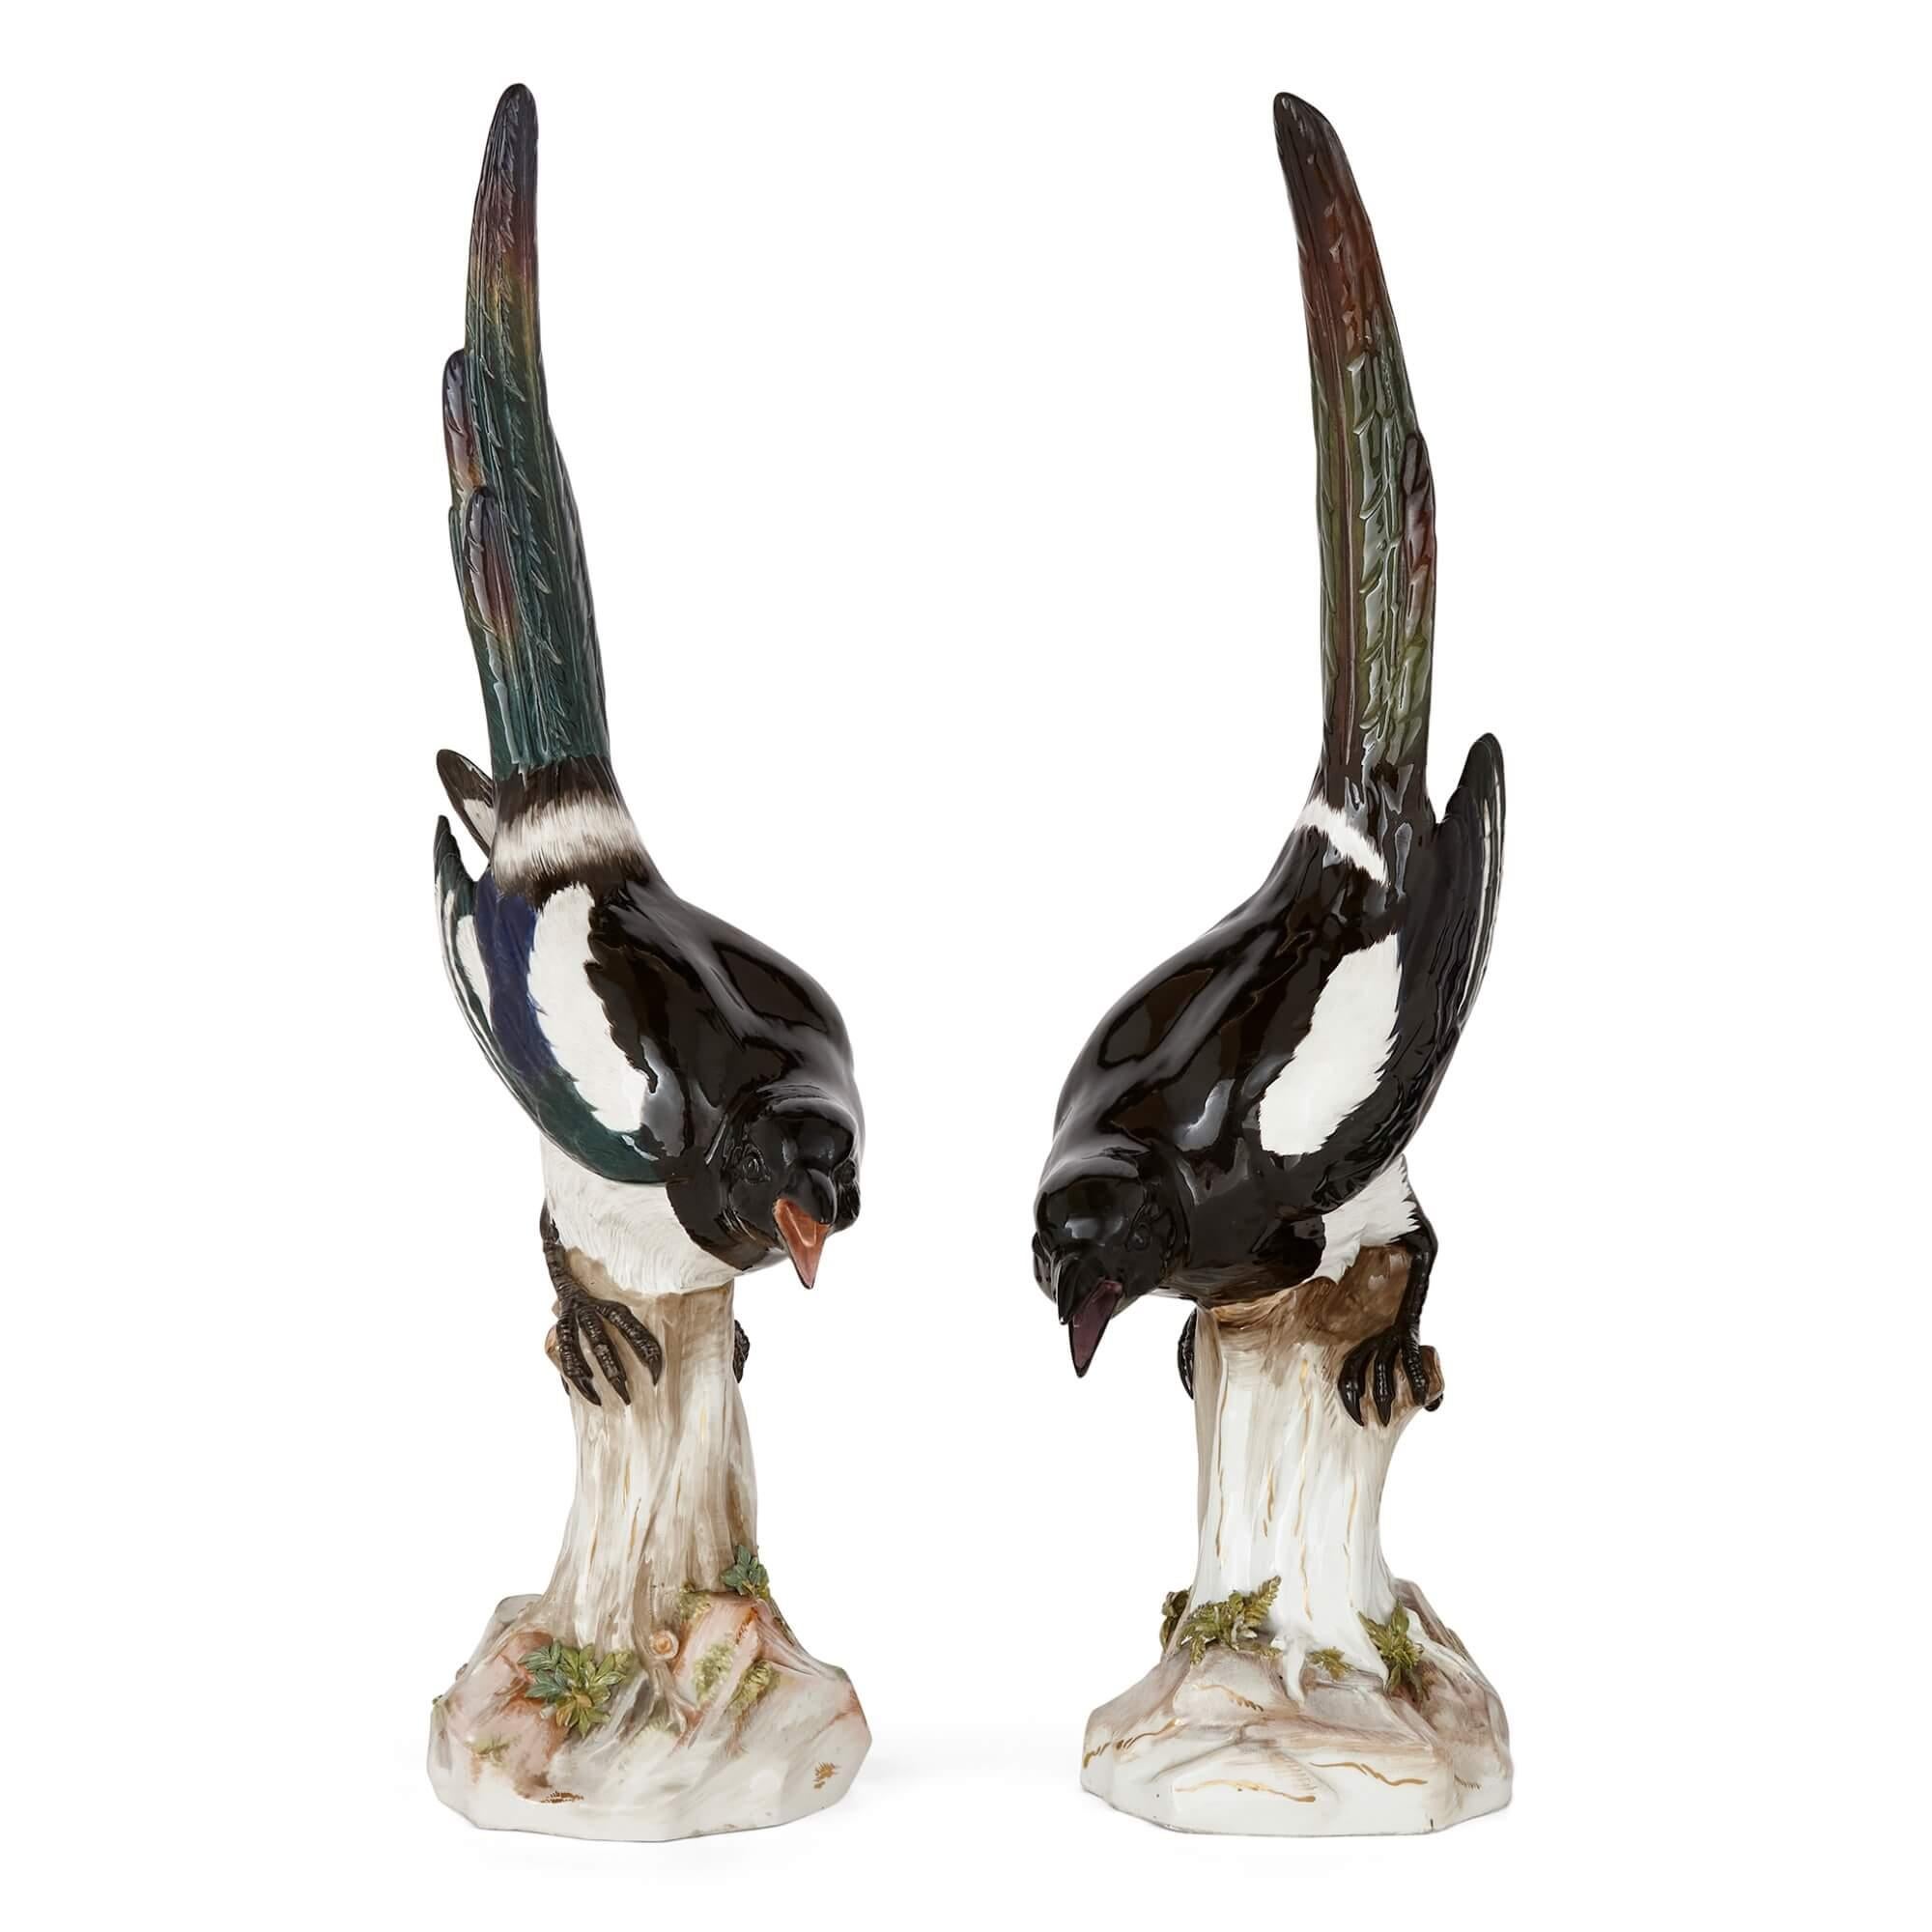 Pair of large Meissen porcelain models of magpies
German, Late 19th Century
Measures: Height 53cm, width 14cm, depth 13cm

These wonderful porcelain Animalia pieces were made by the Meissen Porcelain Manufactory in Germany in the late nineteenth